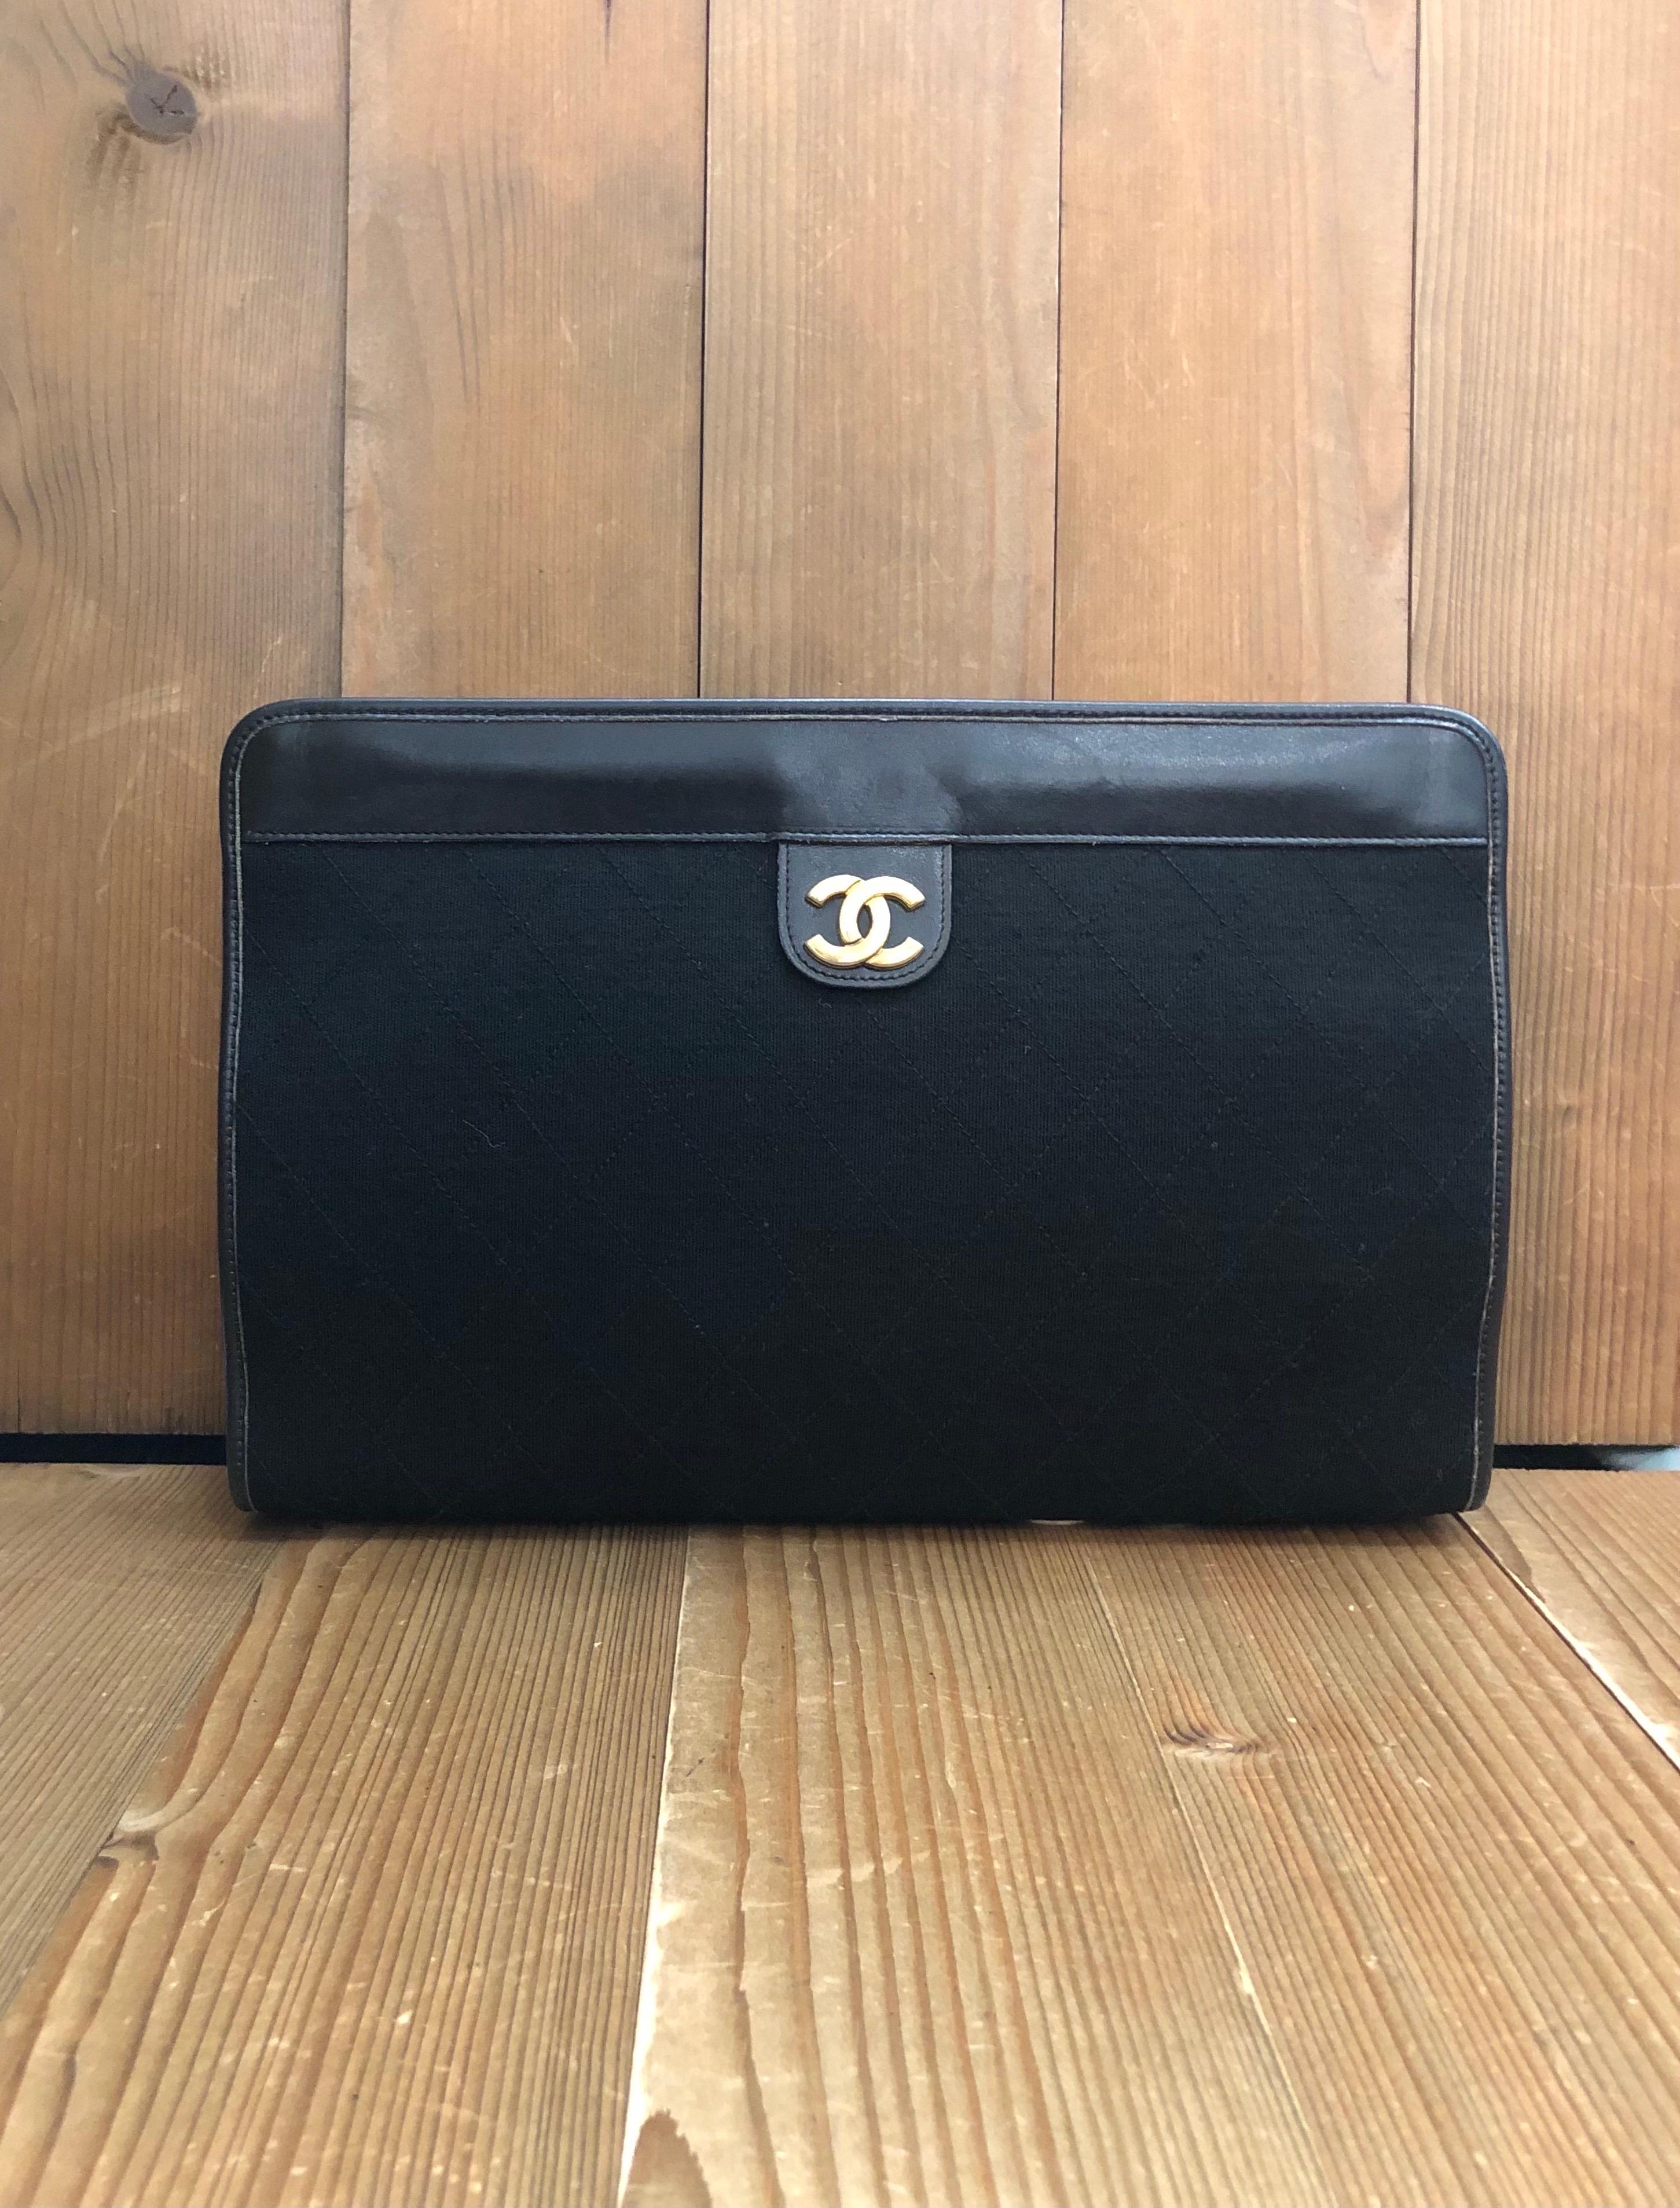 This vintage CHANEL clutch bag is crafted of diamond quilted jersey in black trimmed with black calfskin leather and gold toned hardware. Top spring closure opens to a burgundy lambskin leather interior. Made in France. Measures approximately 11.5 x